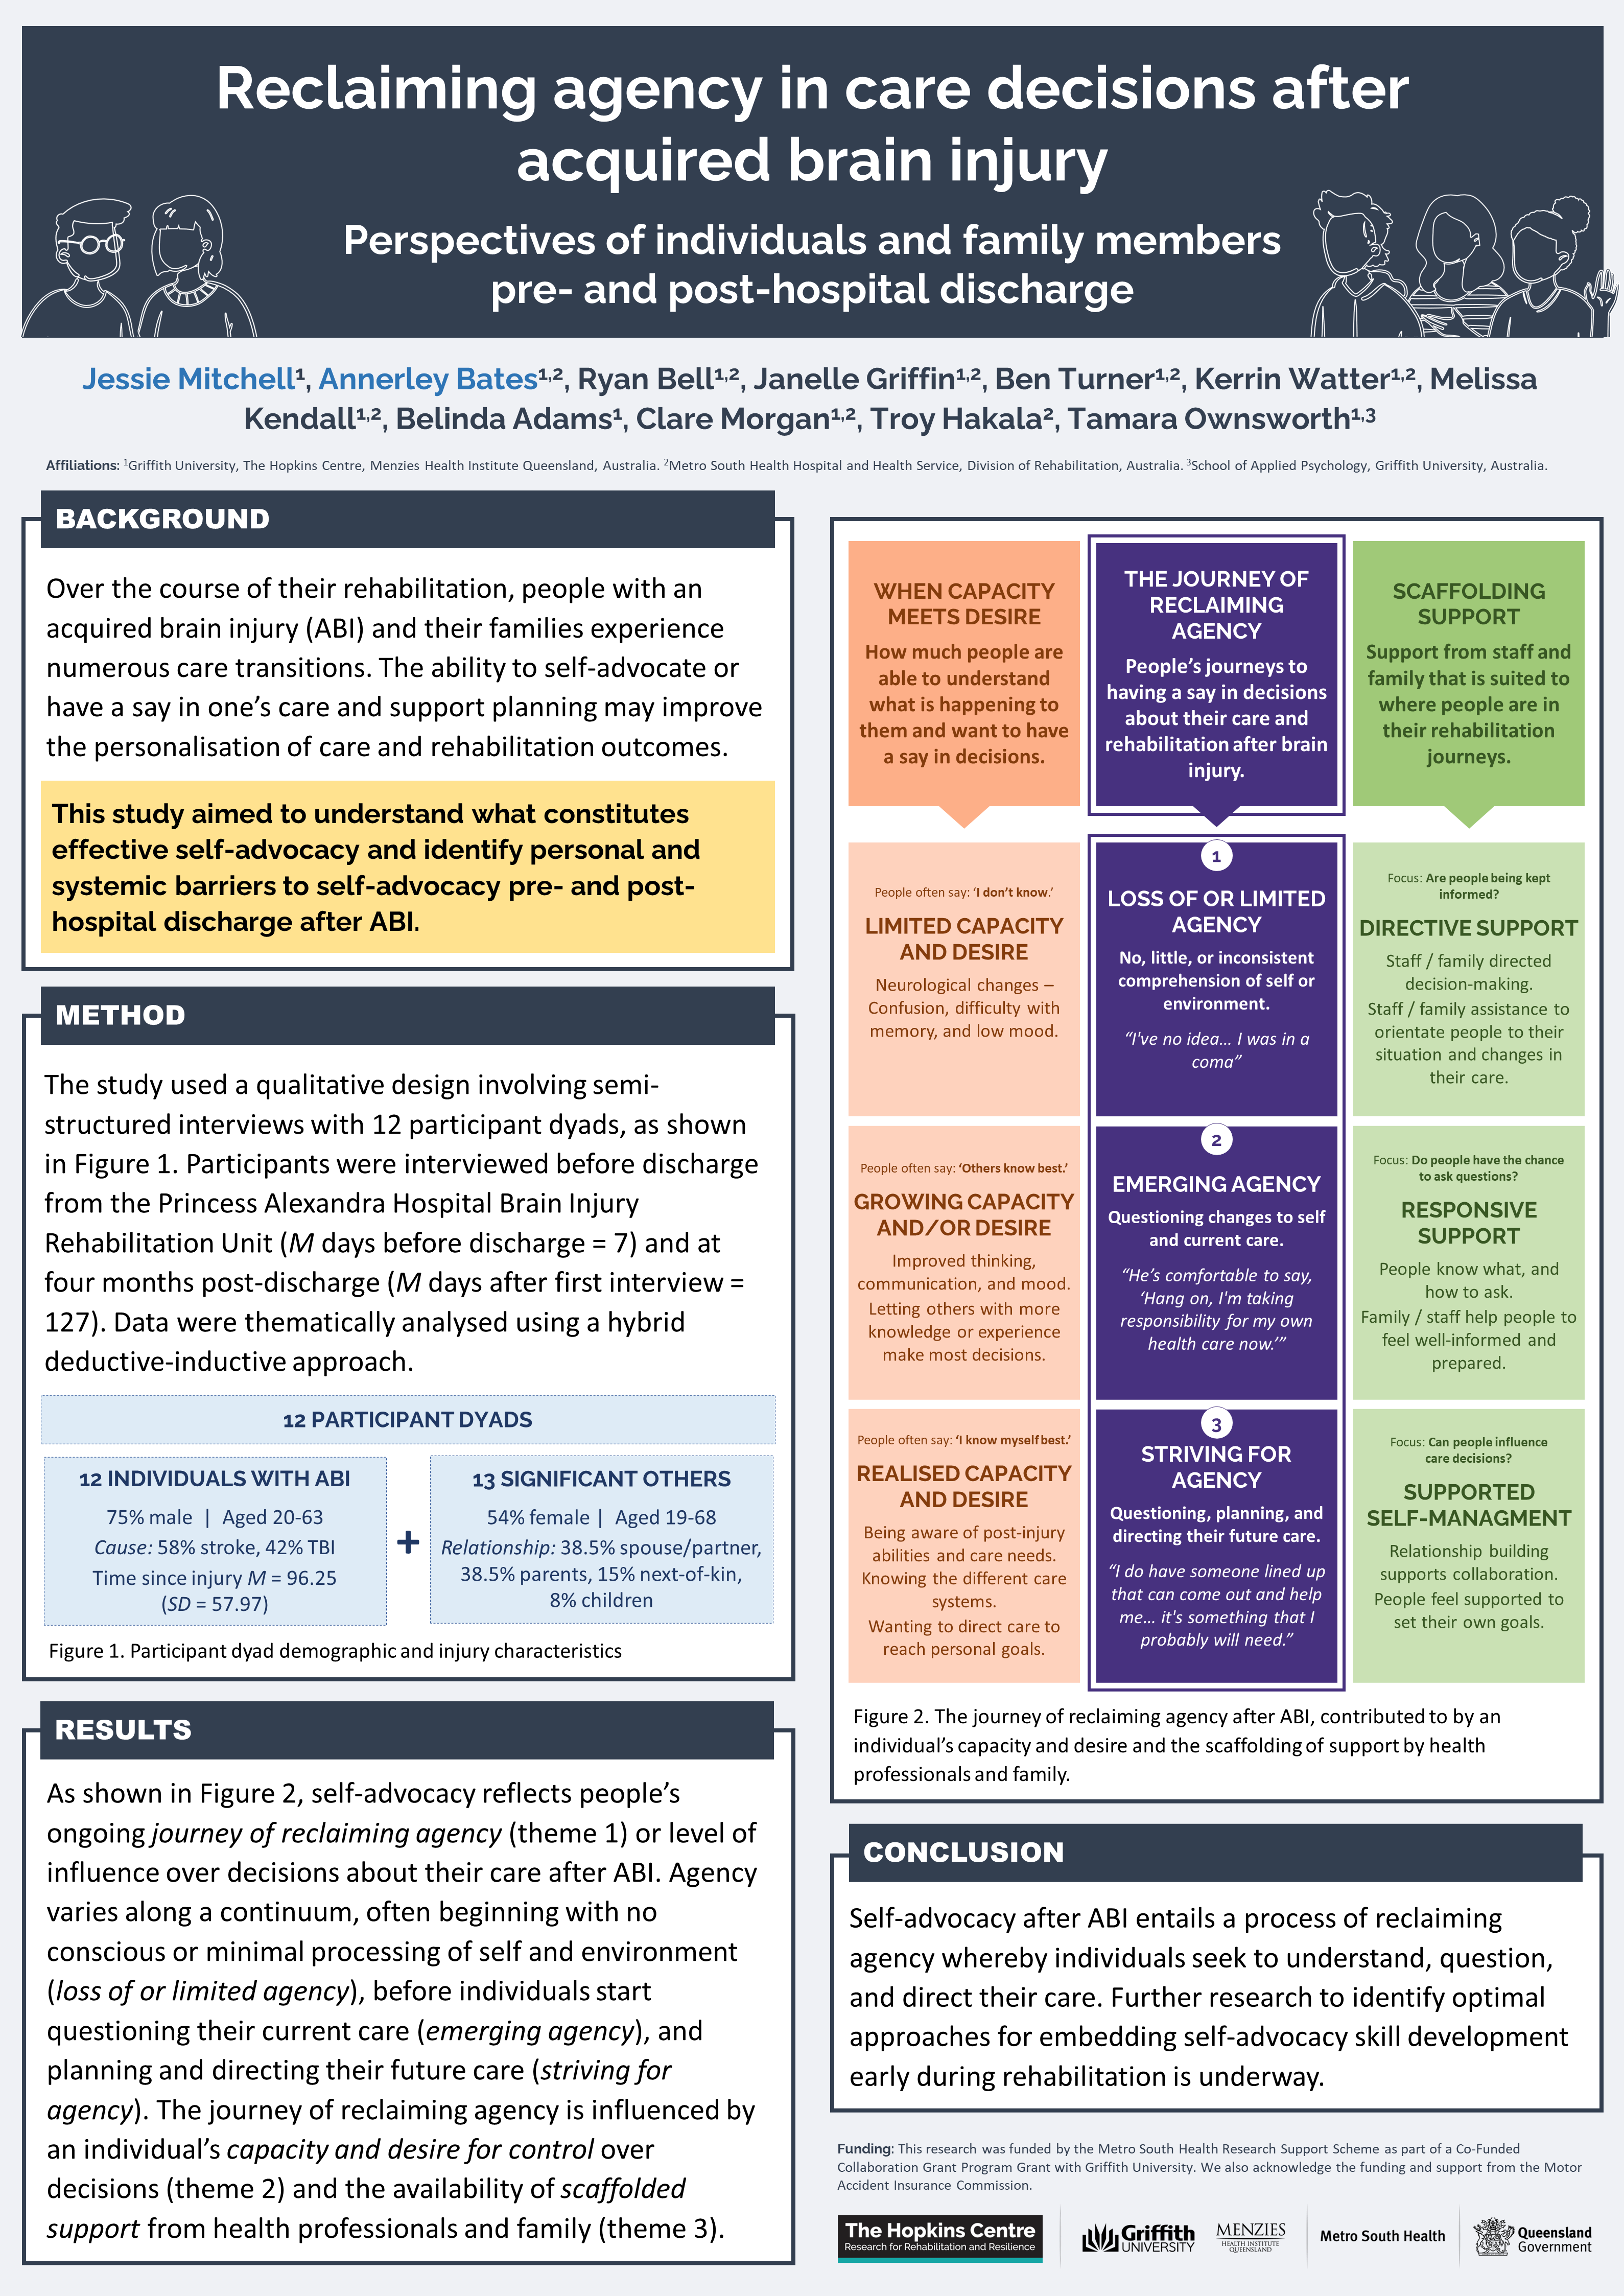 Poster: "Reclaiming agency in care decisions after acquired brain injury"